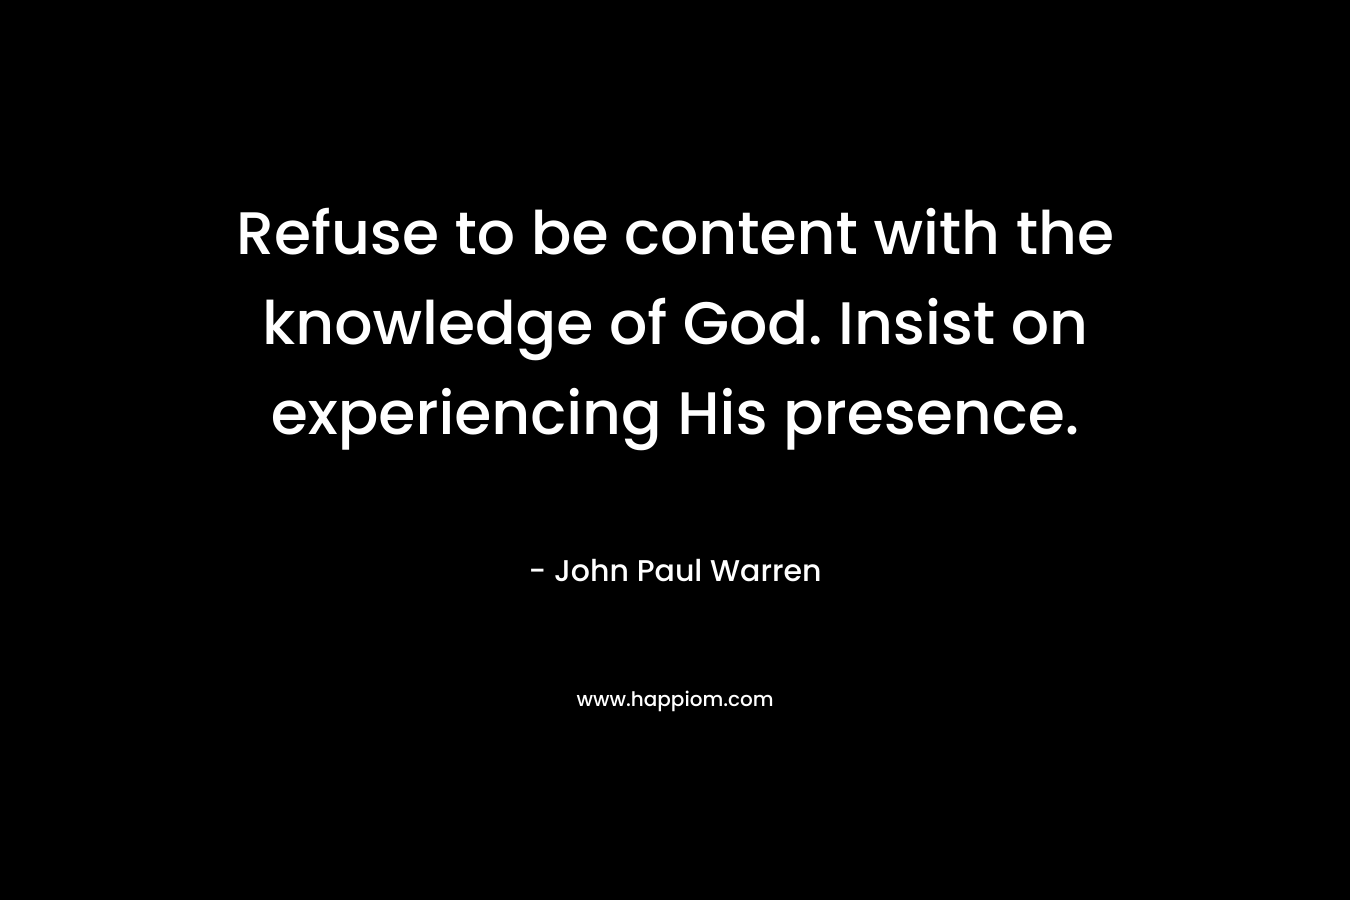 Refuse to be content with the knowledge of God. Insist on experiencing His presence. – John Paul Warren